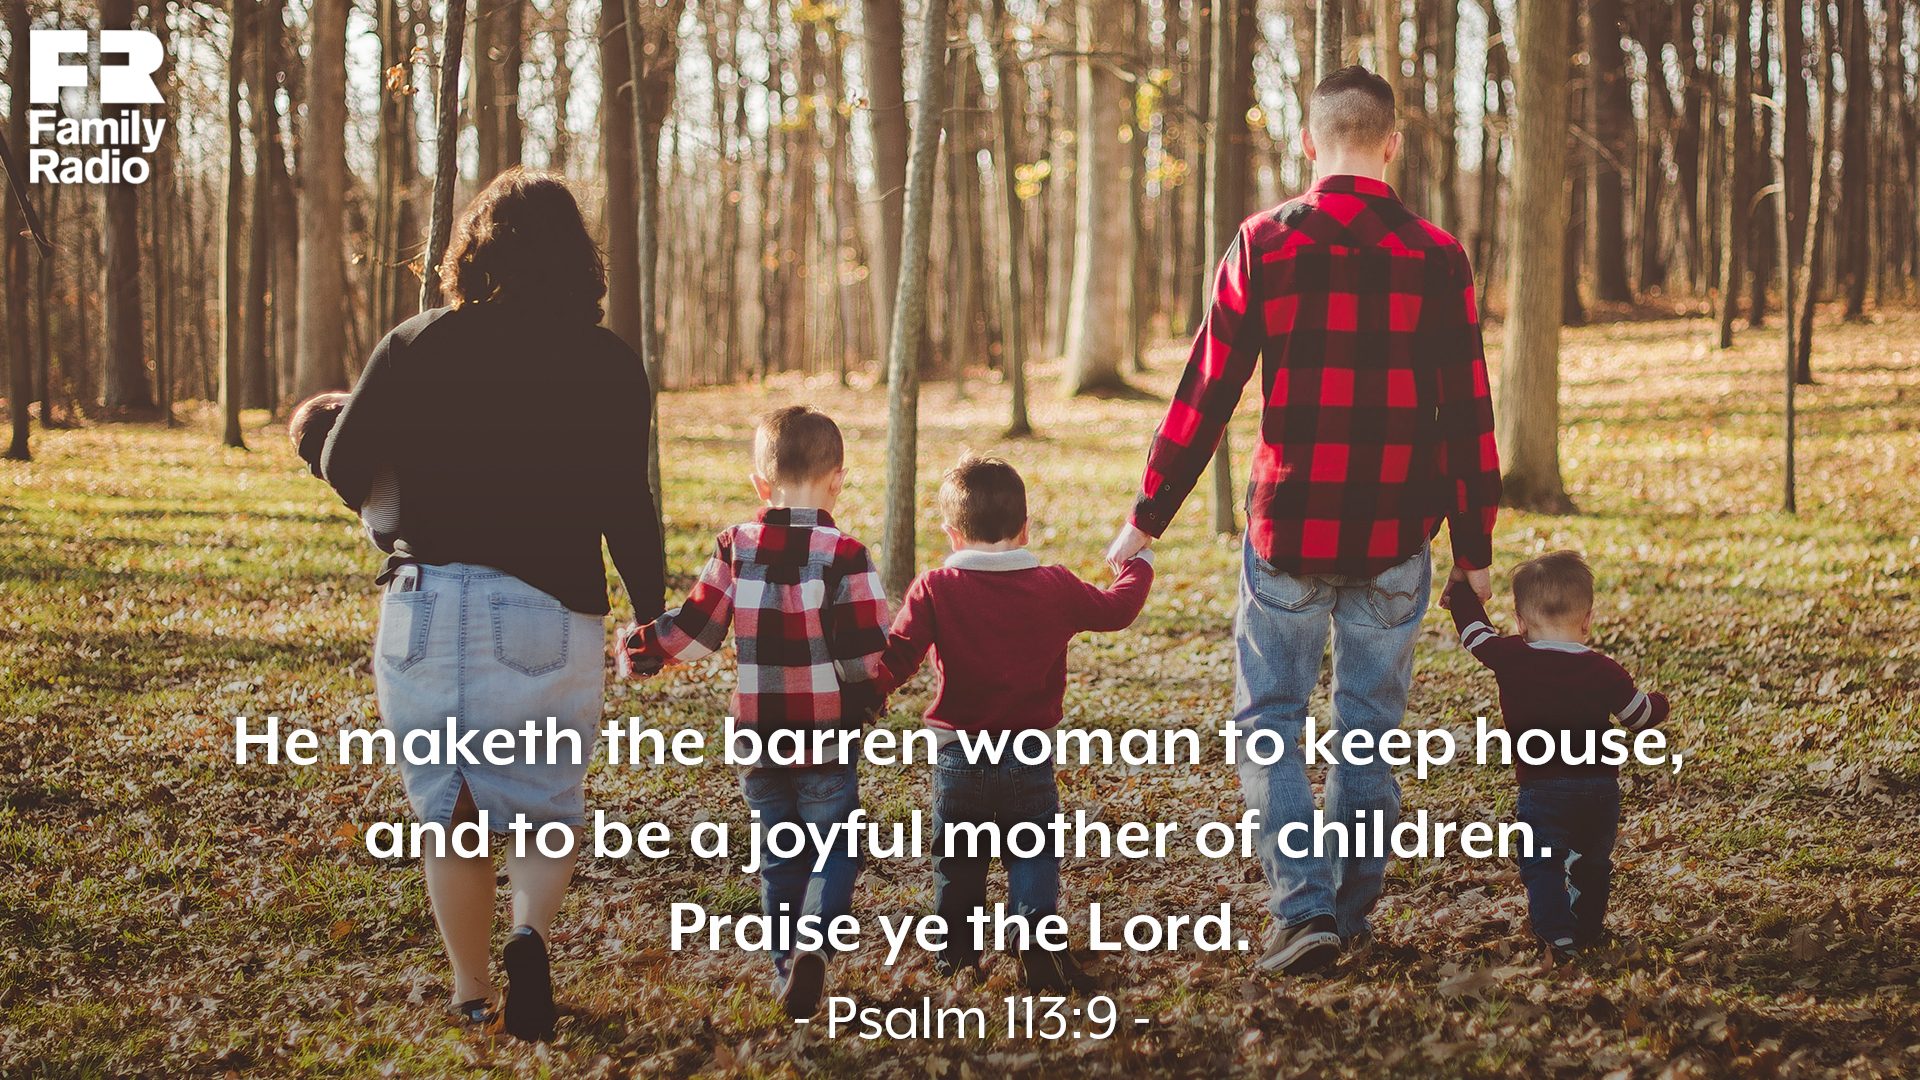 "He maketh the barren woman to keep house, and to be a joyful mother of children. Praise ye the Lord."